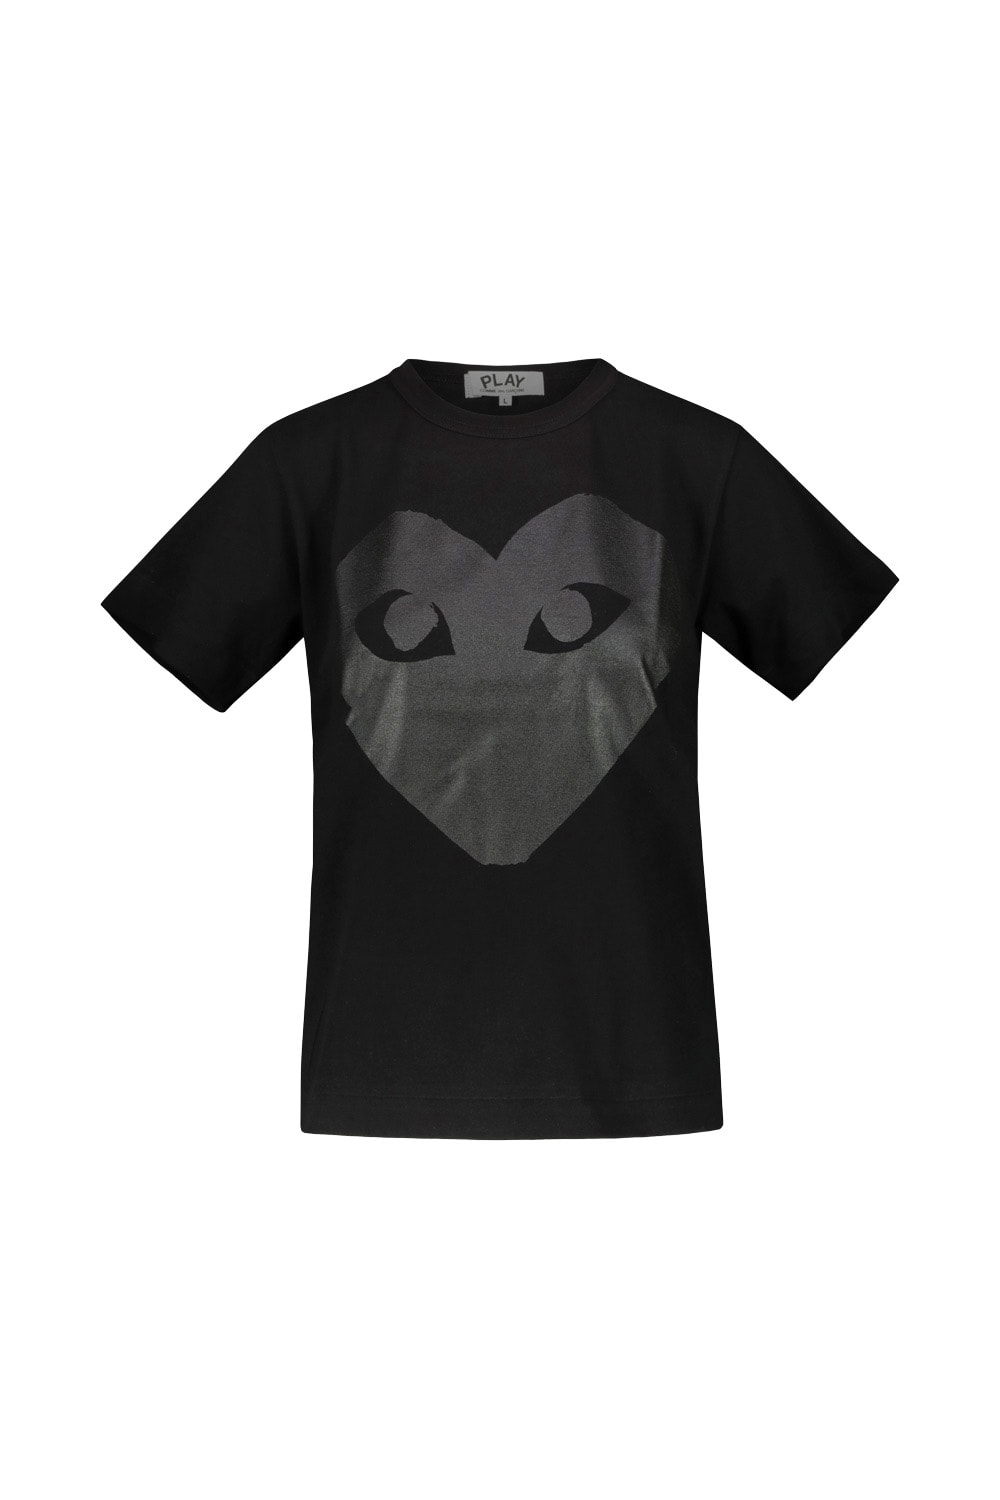 Comme Des Garçons Play Black Short Sleeve T-shirt With Black Printed Heart On The Front And Back In Blk